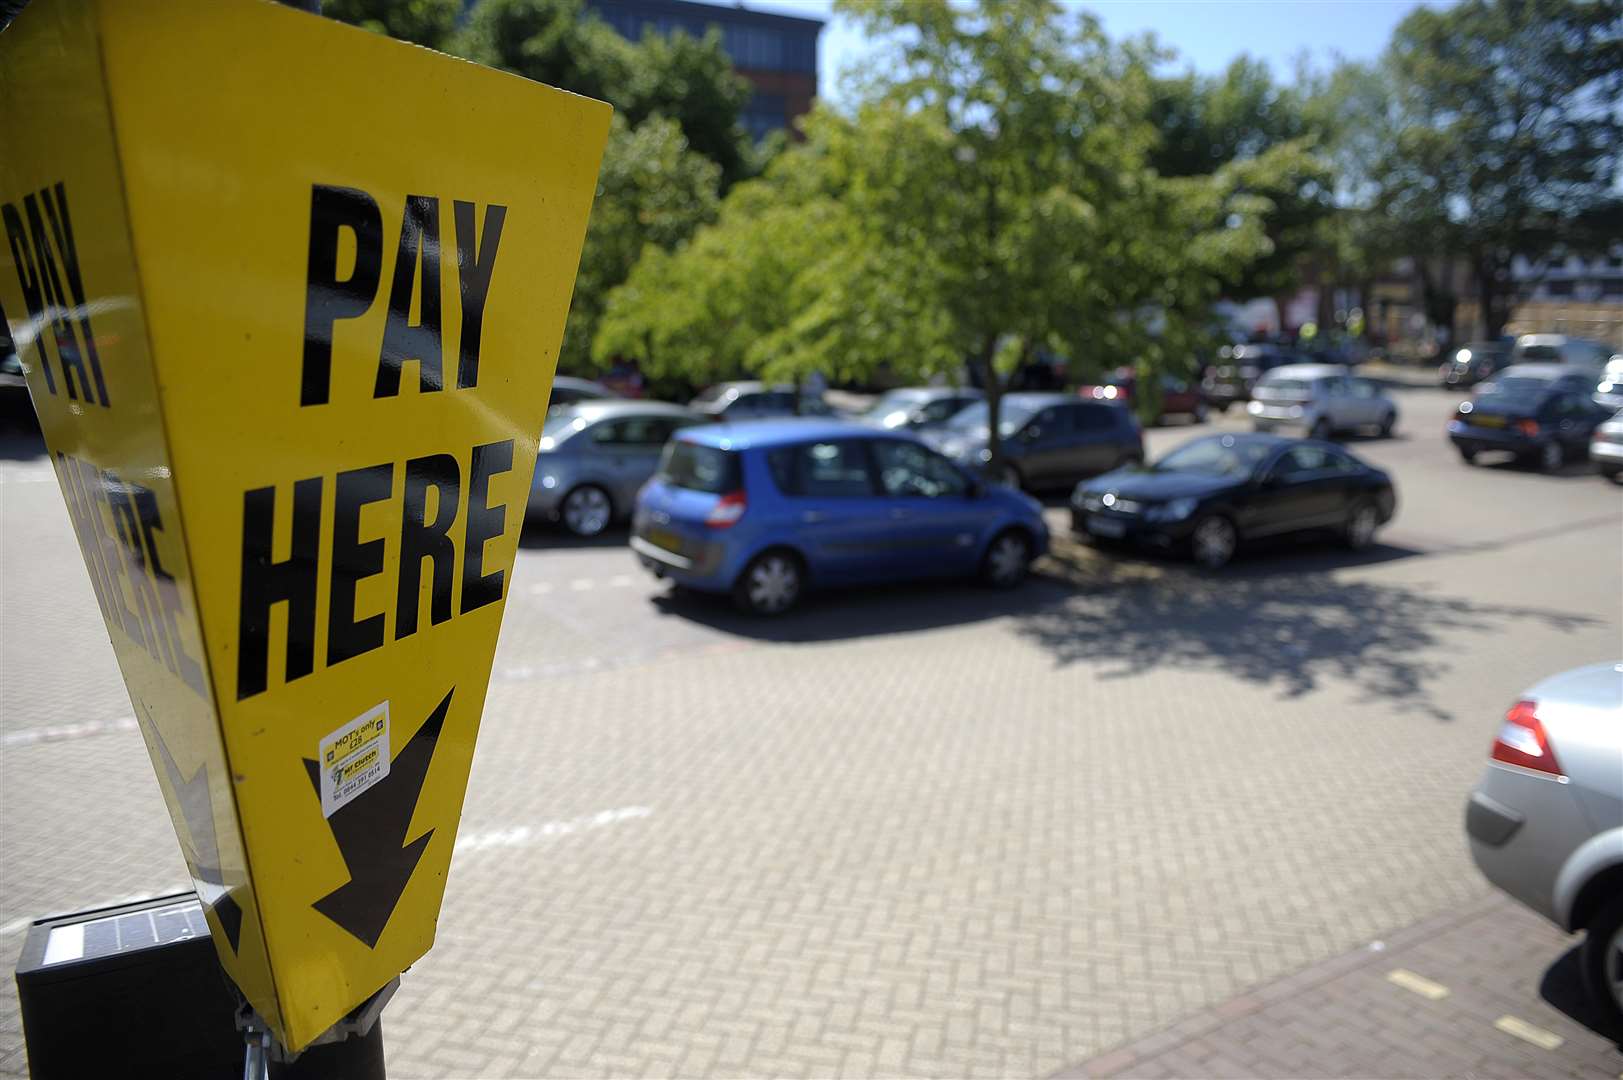 Some councils are failing to give change for parking